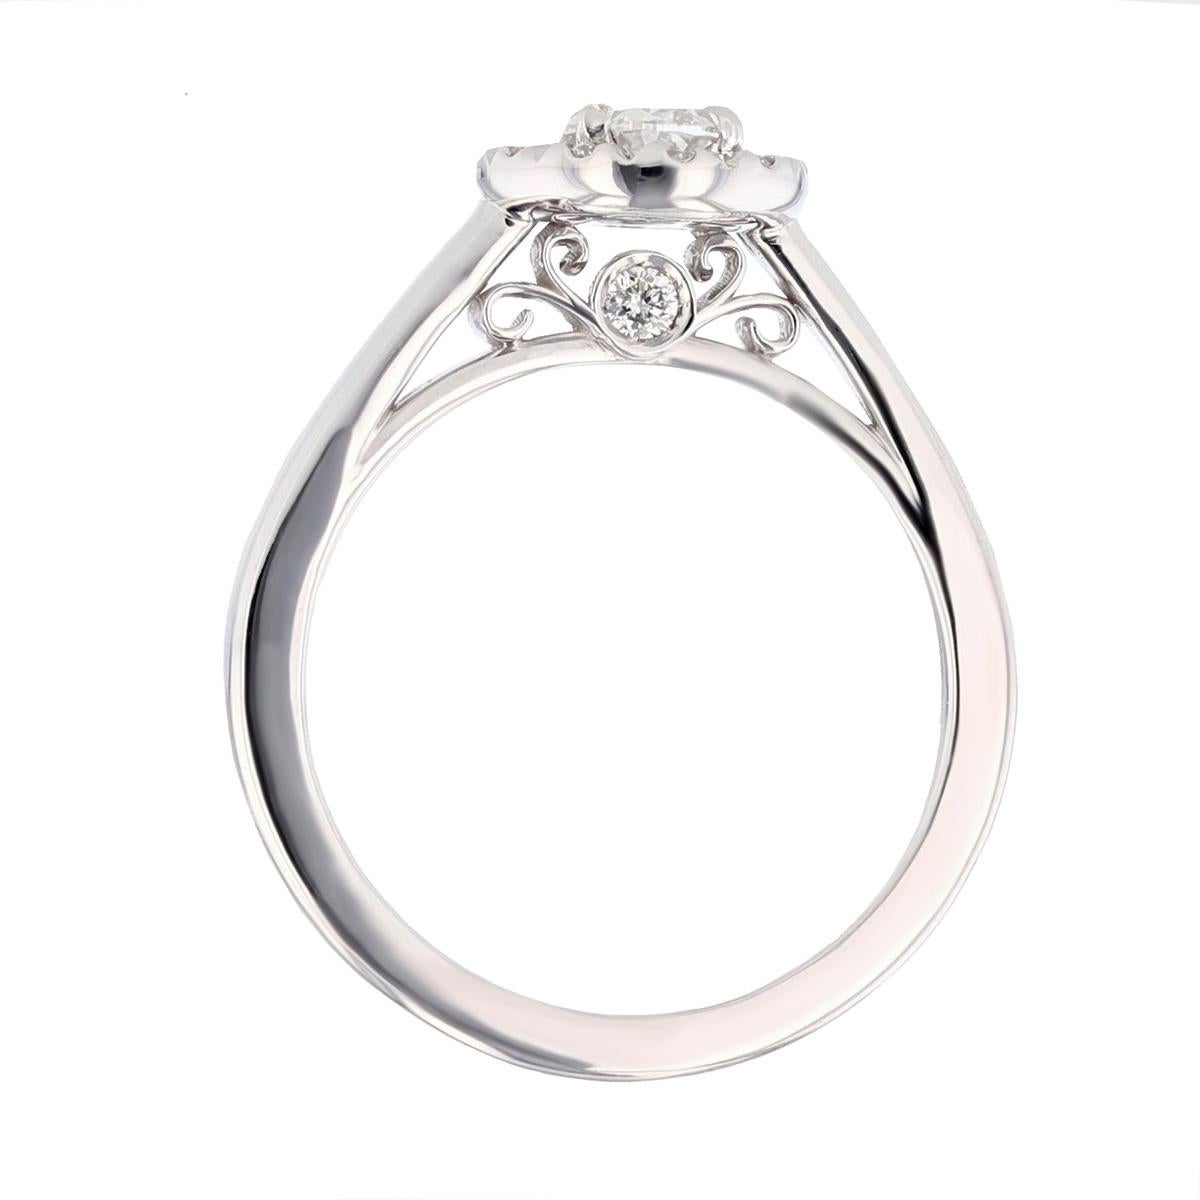 This ring is made with 14 karat white gold and features a prong set  0.48ct  IGI certified oval cut diamond (IGI Certificate number: IGI 9272811), with a color grade (E) and clarity grade (I1) and is surrounded by 14 round cut diamonds weighing